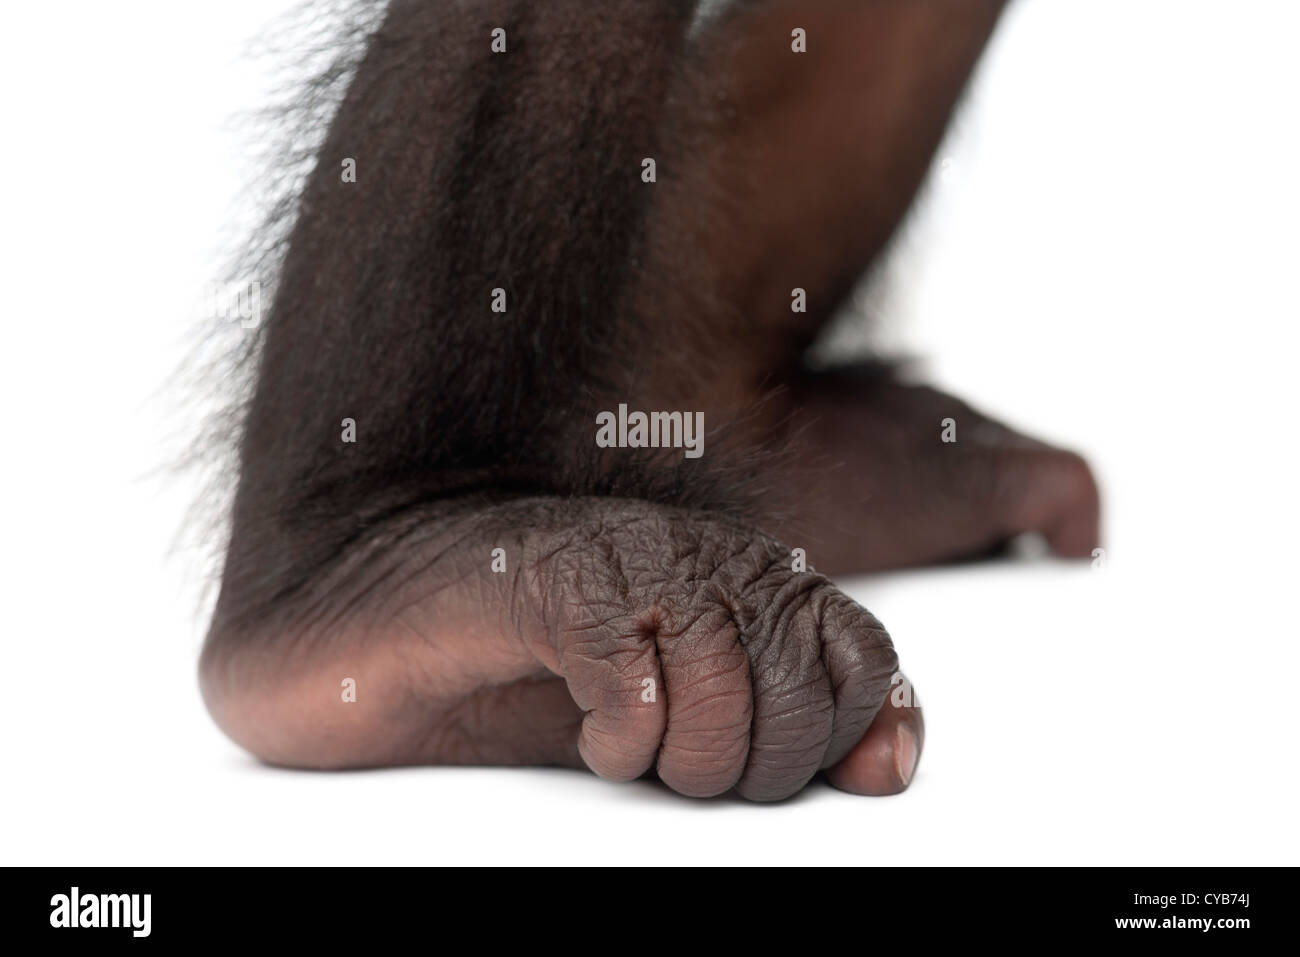 Baby bonobo, Pan paniscus, 4 months old, close up of feet against white background Stock Photo